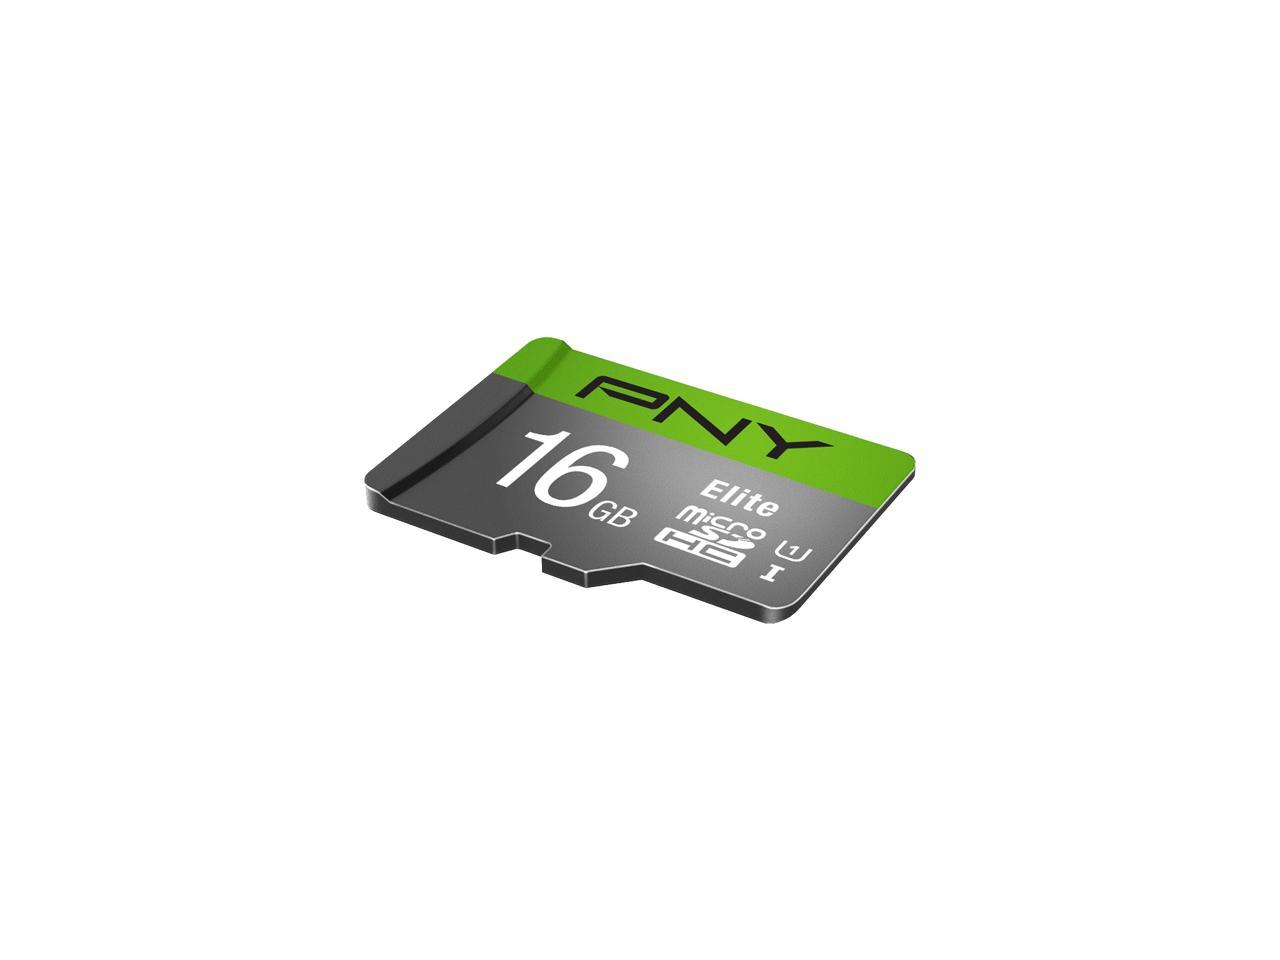 PNY 16GB Elite microSDHC UHS-I/U1 Class 10 Memory Card with Adapter, Speed Up to 85MB/s (P-SDU16U185EL-GE)